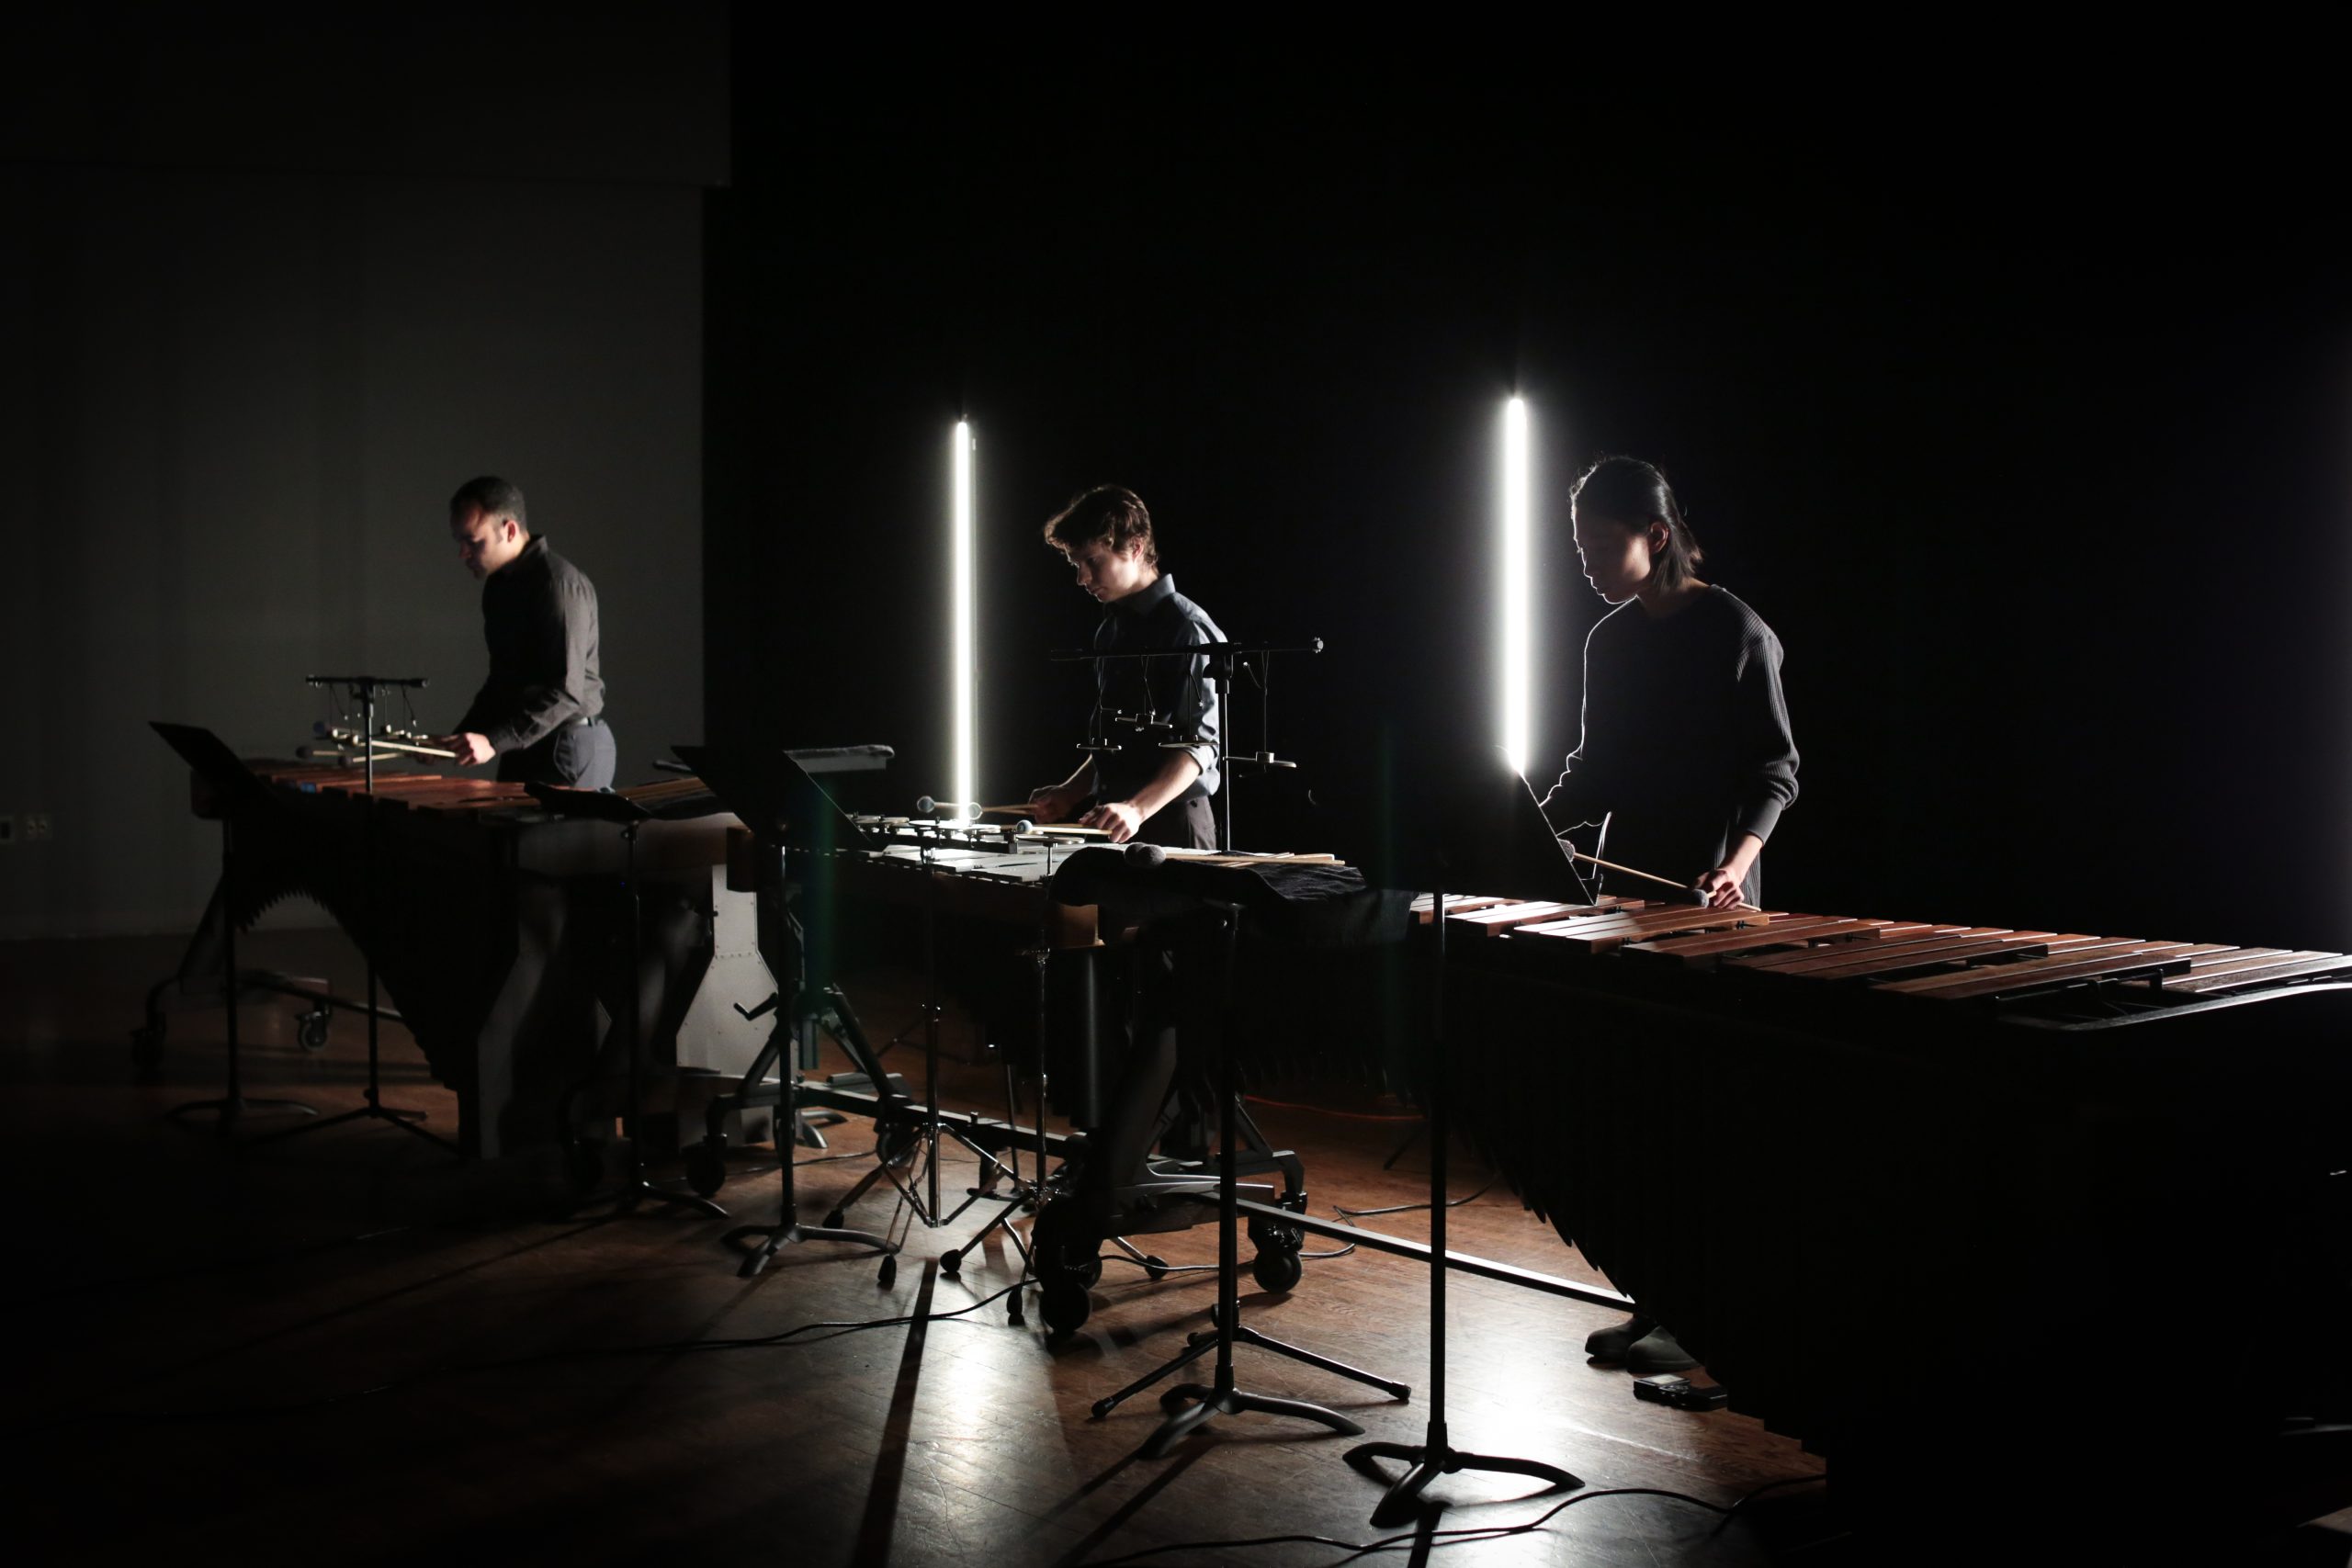 Three individuals perform on xylophones; two column-shaped lights shine from behind them onto a dark and shadowy stage.